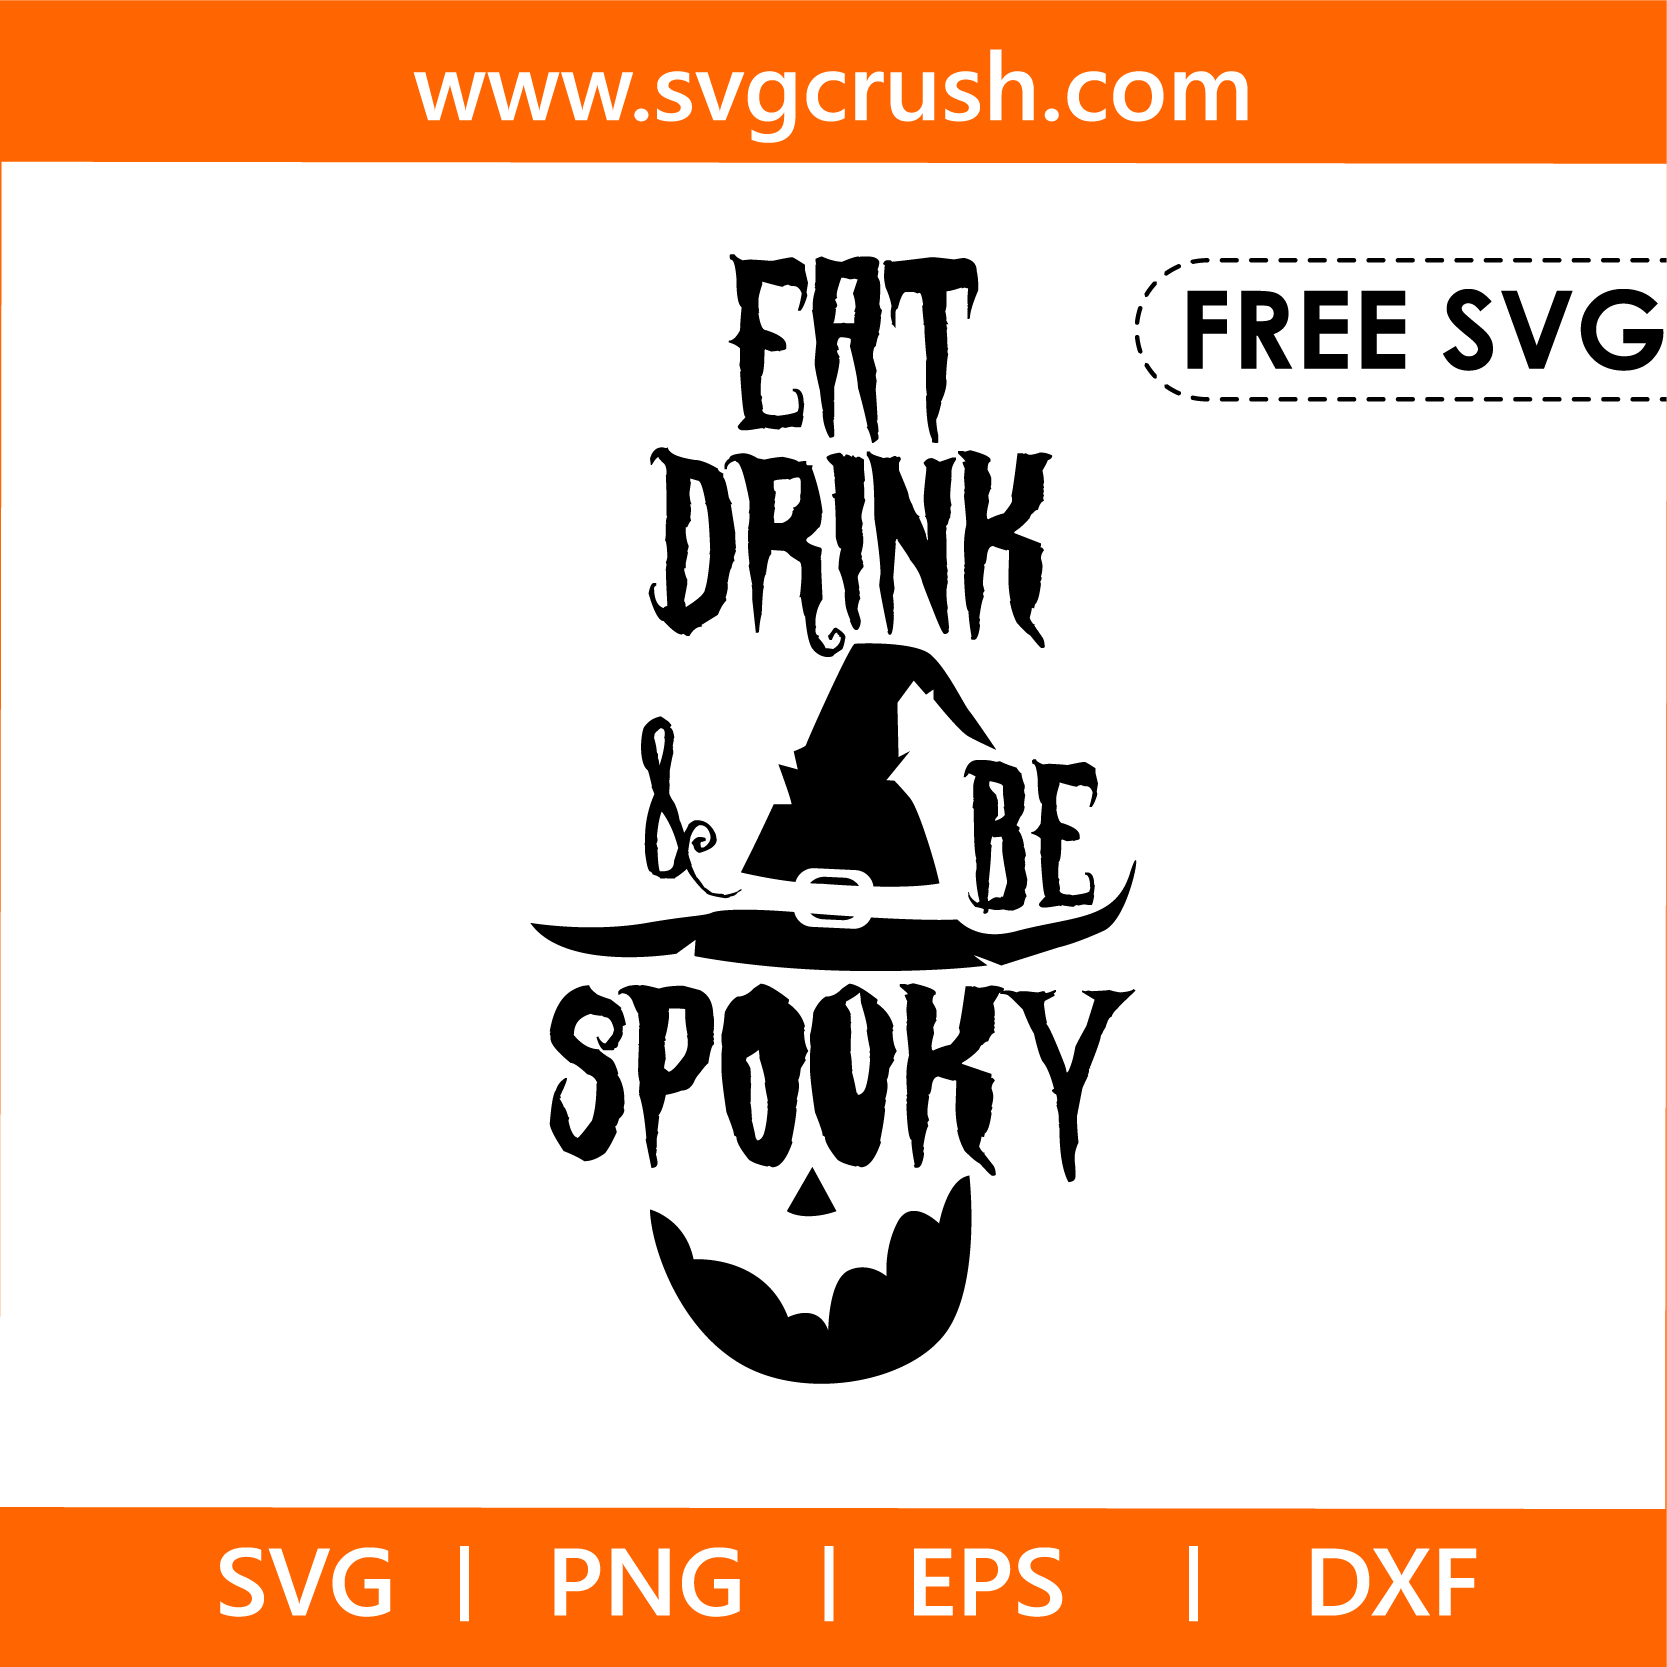 free eat-drink-and-be-spooky-005 svg